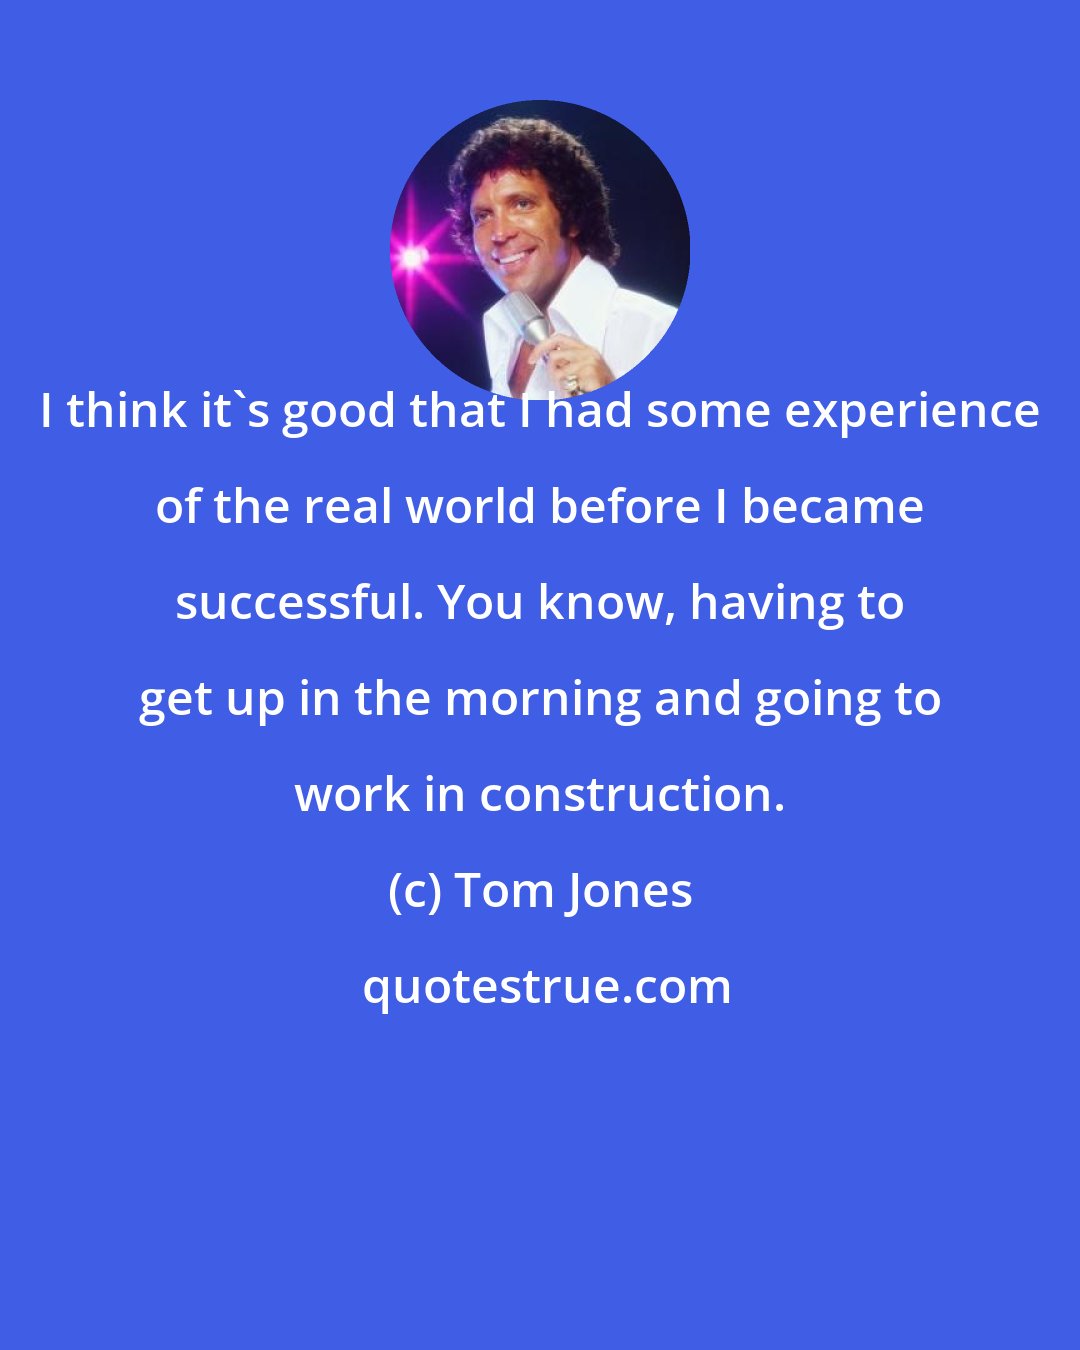 Tom Jones: I think it's good that I had some experience of the real world before I became successful. You know, having to get up in the morning and going to work in construction.